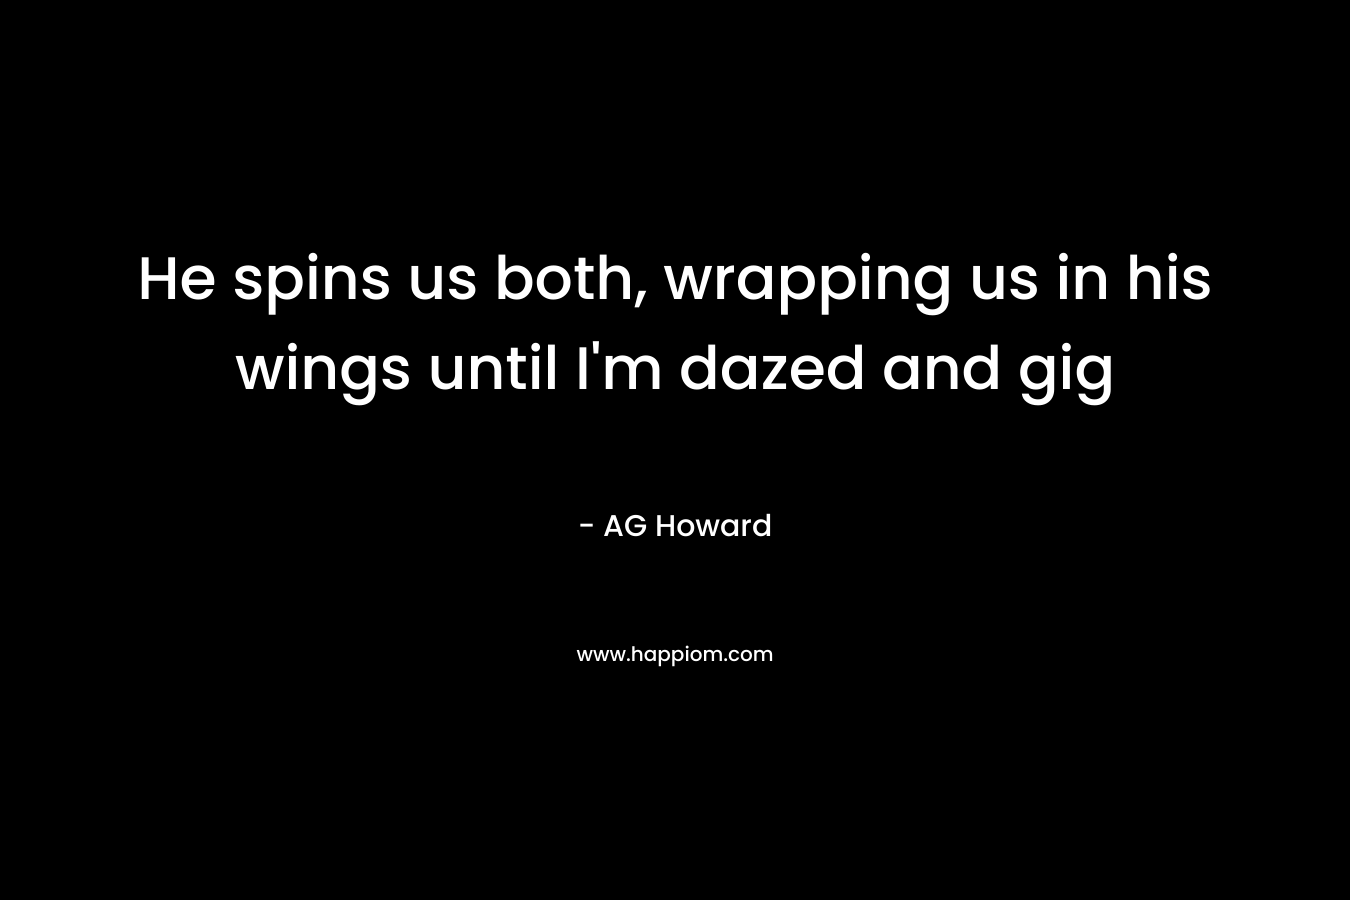 He spins us both, wrapping us in his wings until I’m dazed and gig – AG Howard